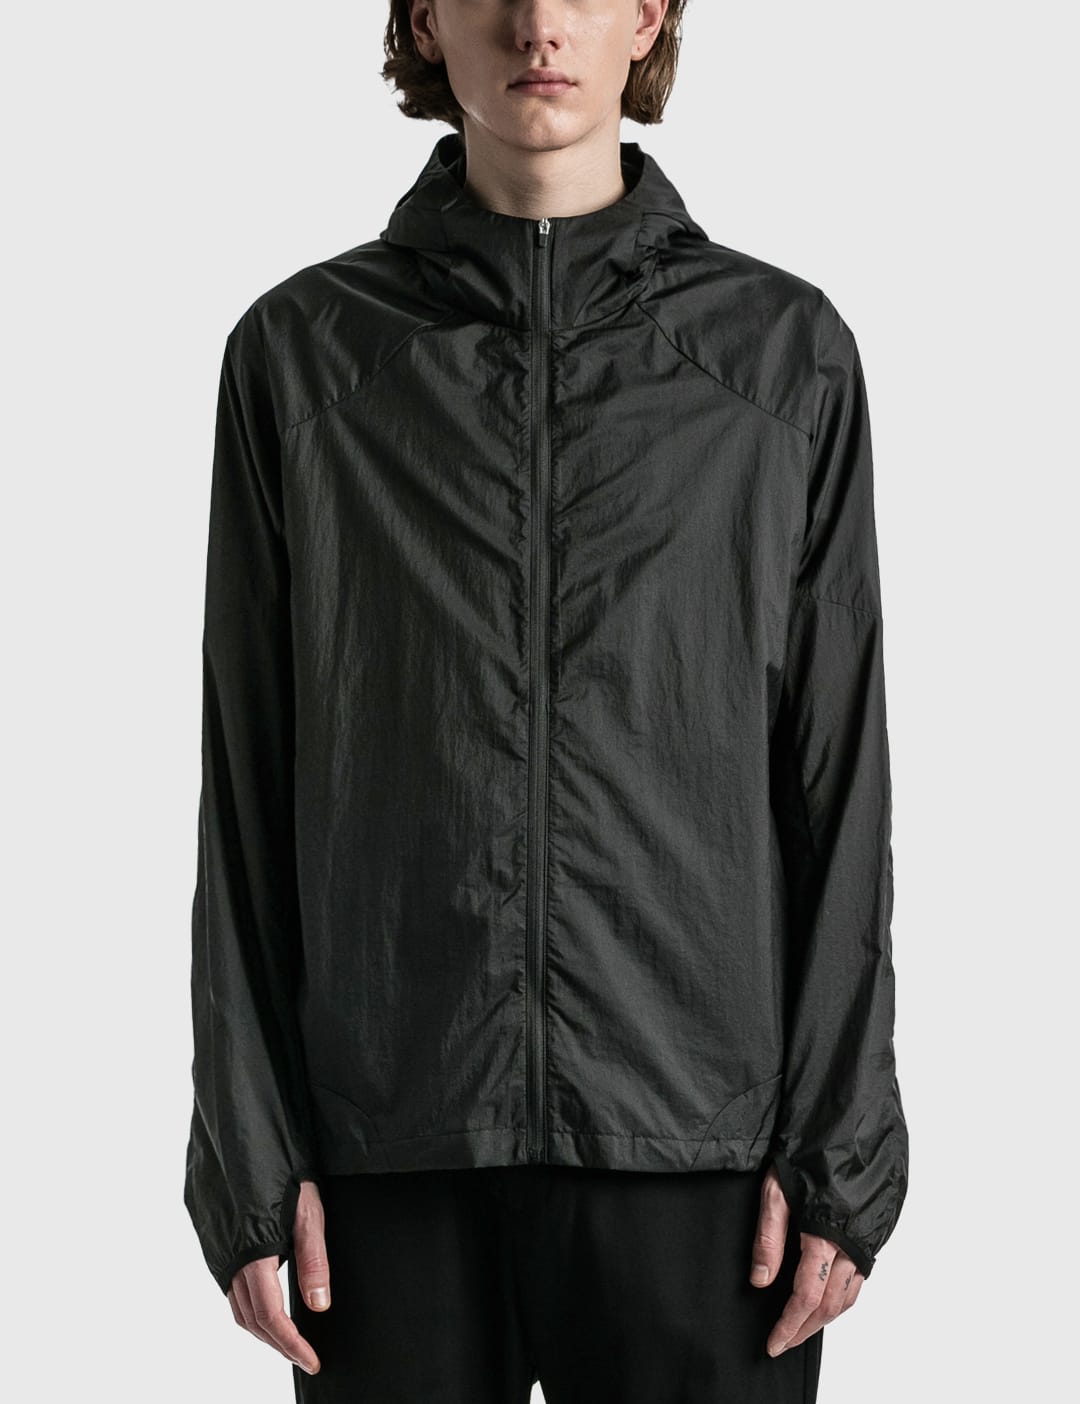 POST ARCHIVE FACTION (PAF) - 5.0 TECHNICAL JACKET RIGHT | HBX